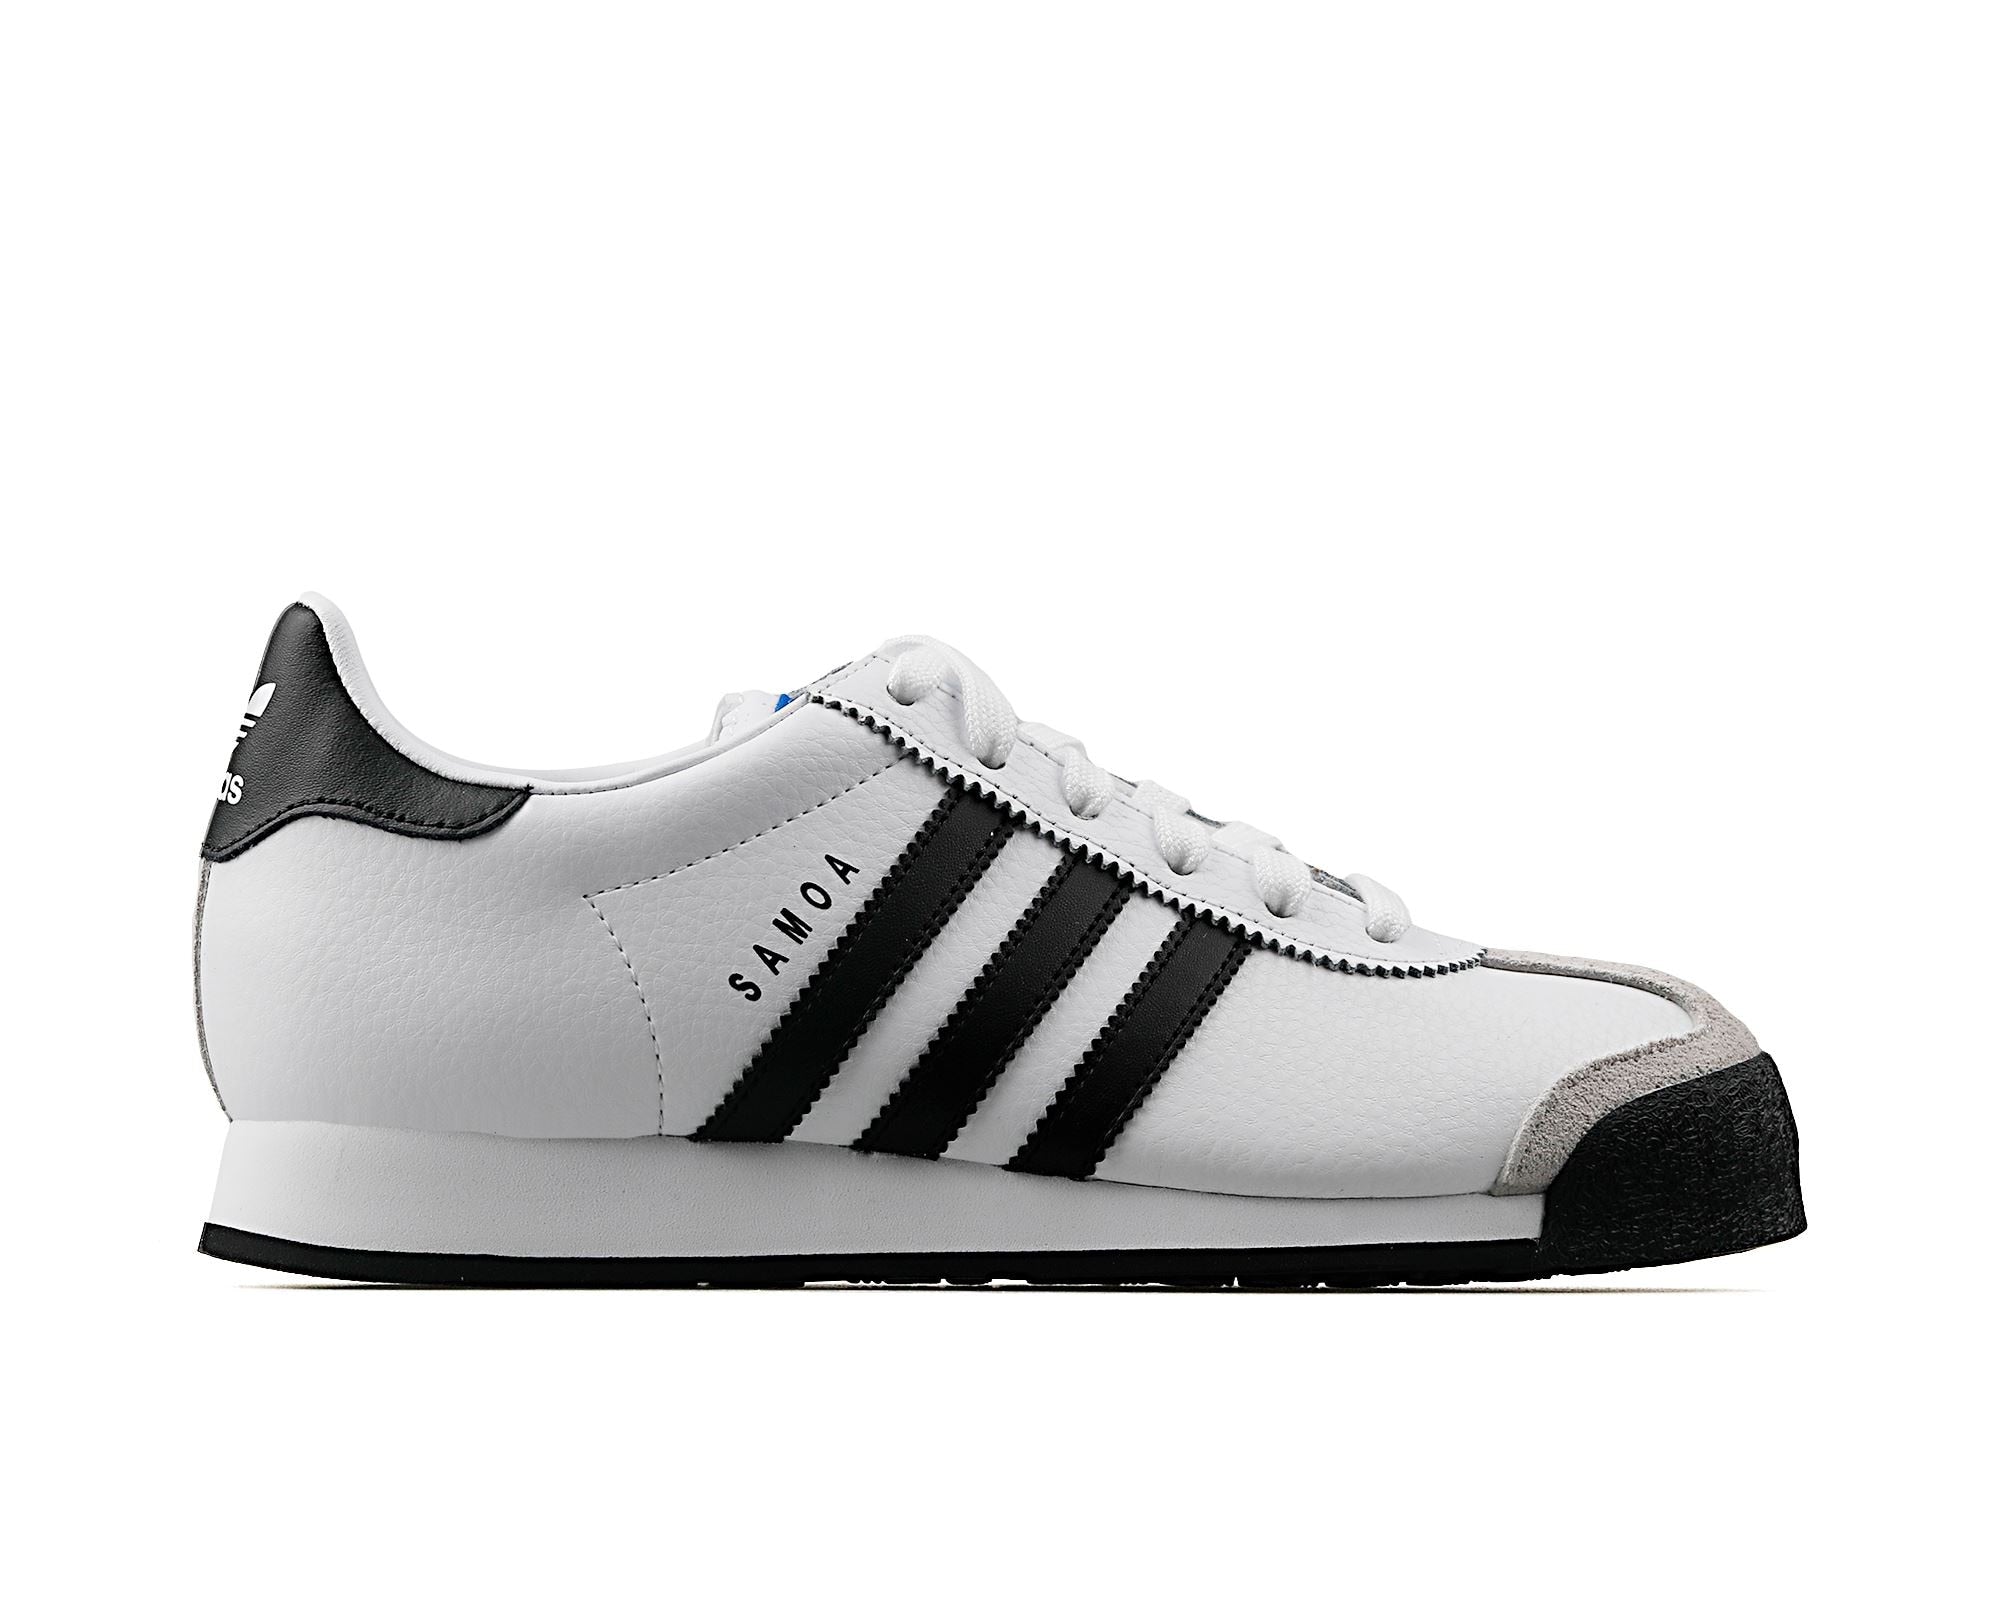 Adidas Samoa Trainers suit For Men And Women , Comfortable Sport or casual Shoes